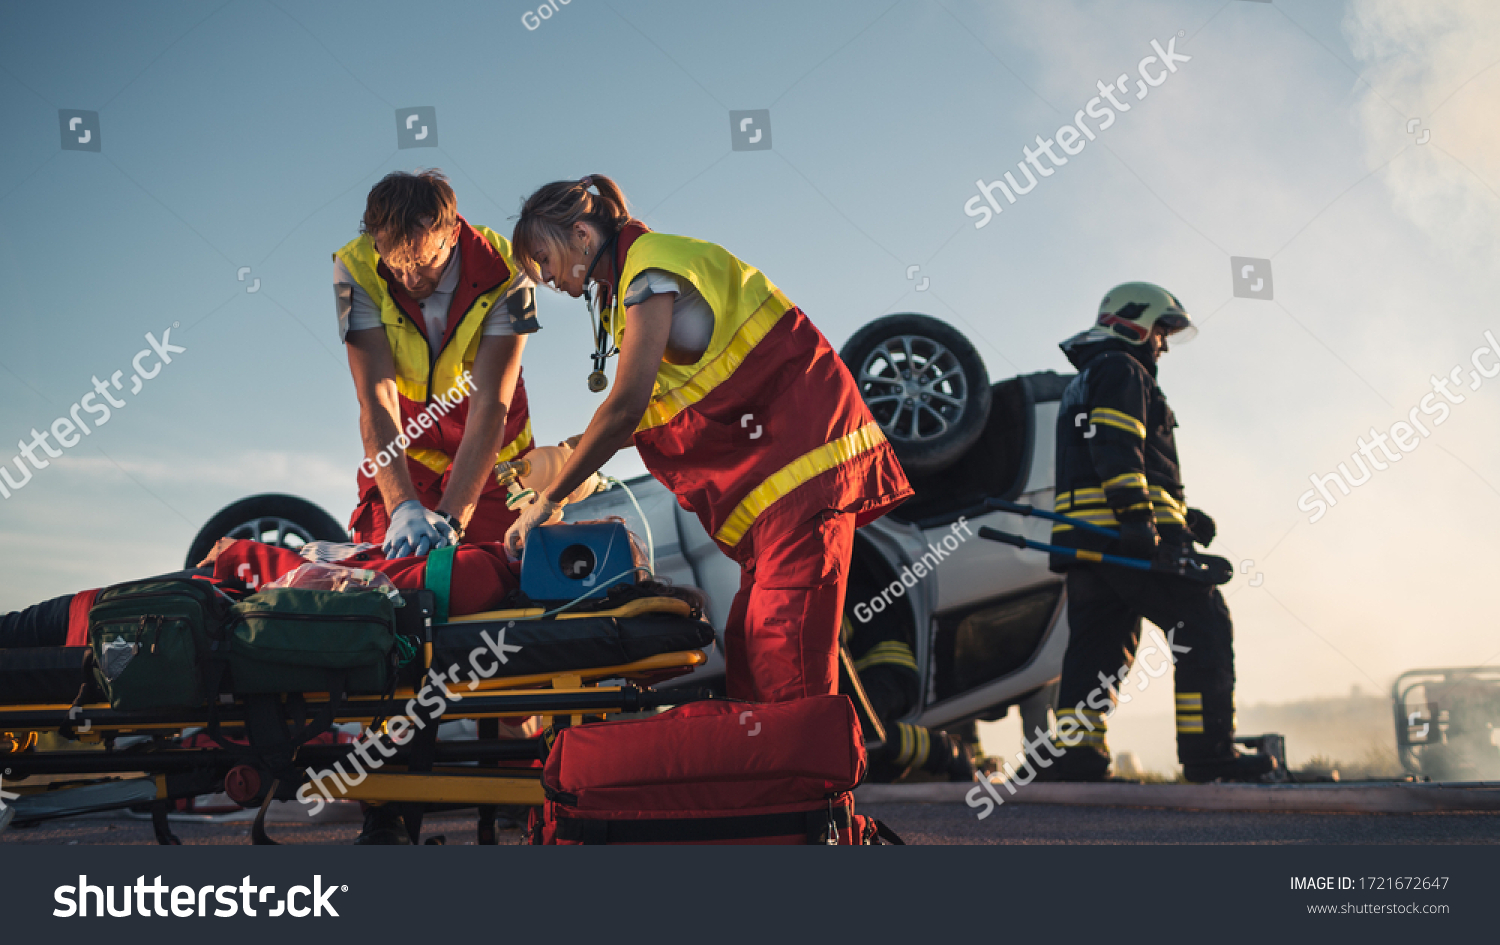 On the Car Crash Traffic Accident Scene: Paramedics Saving Life of a Female Victim who is Lying on Stretchers. They Apply Oxygen Mask, Do Cardiopulmonary Resuscitation / CPR and Perform First Aid #1721672647